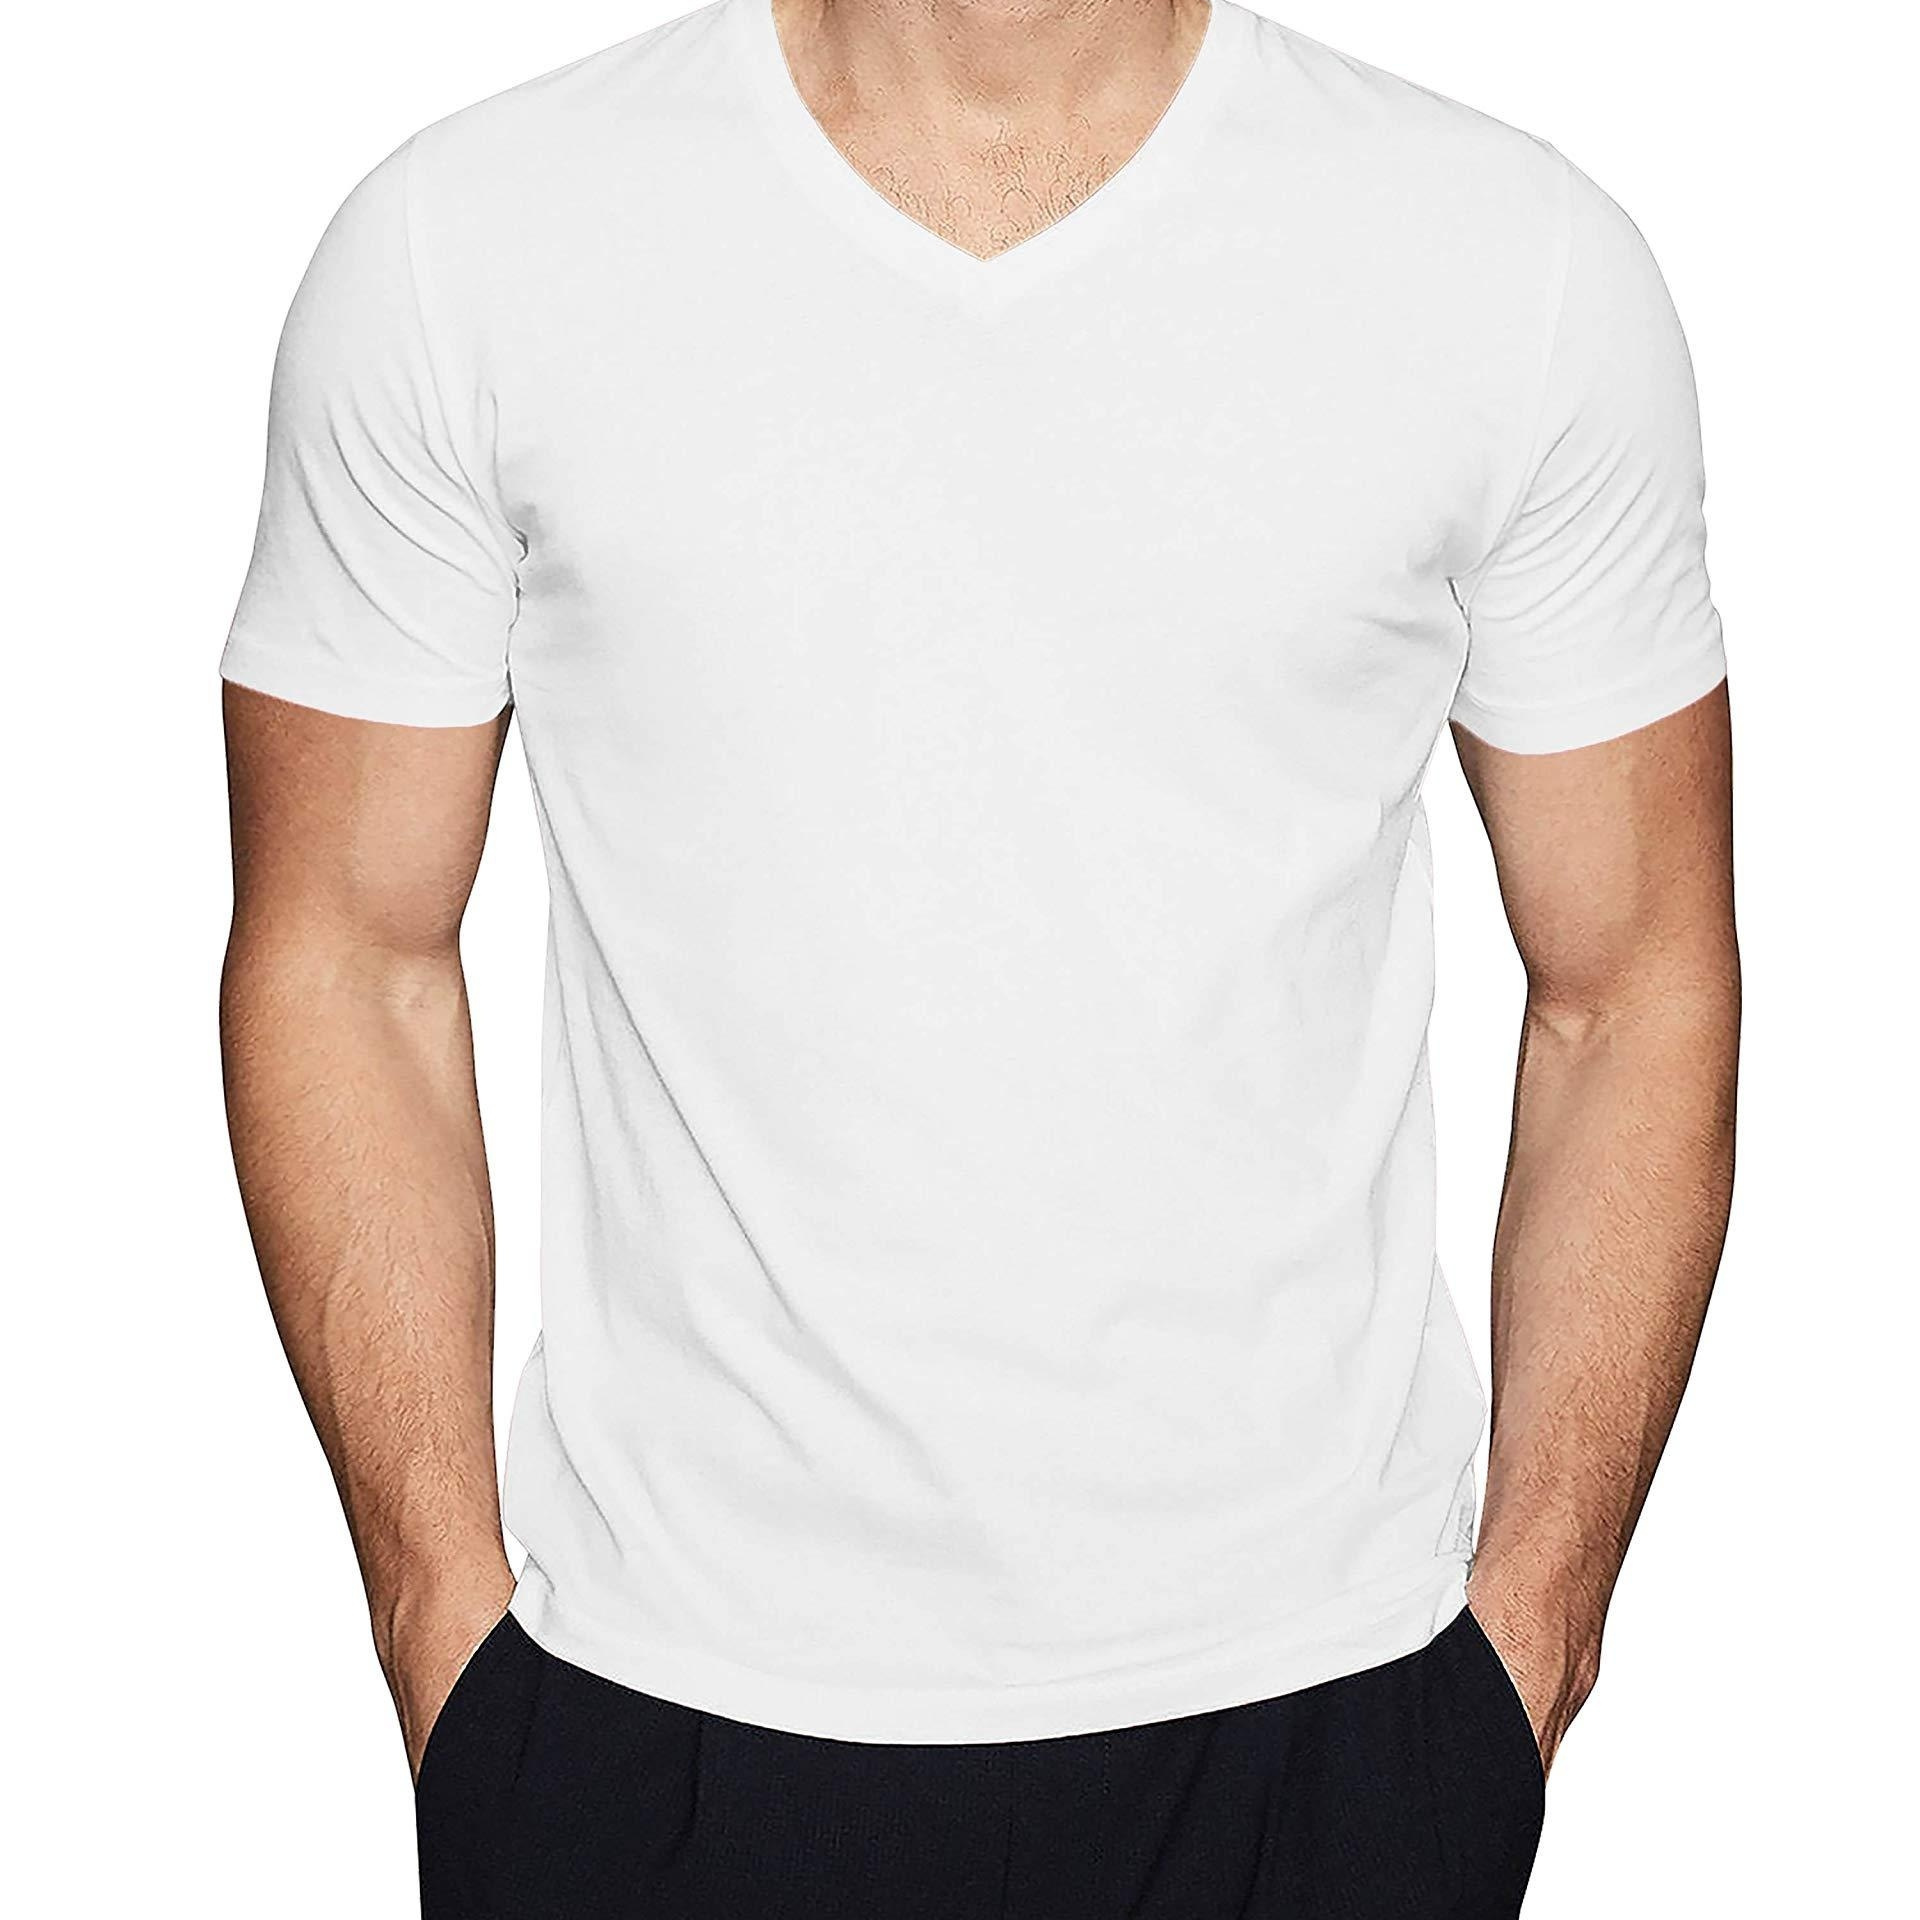 

Men's V Neck Fashionable Short Sleeve Sports T-shirt, Comfortable And Versatile, For Summer And Spring, Athletic Style, Comfort Fit T-shirt, As Gifts